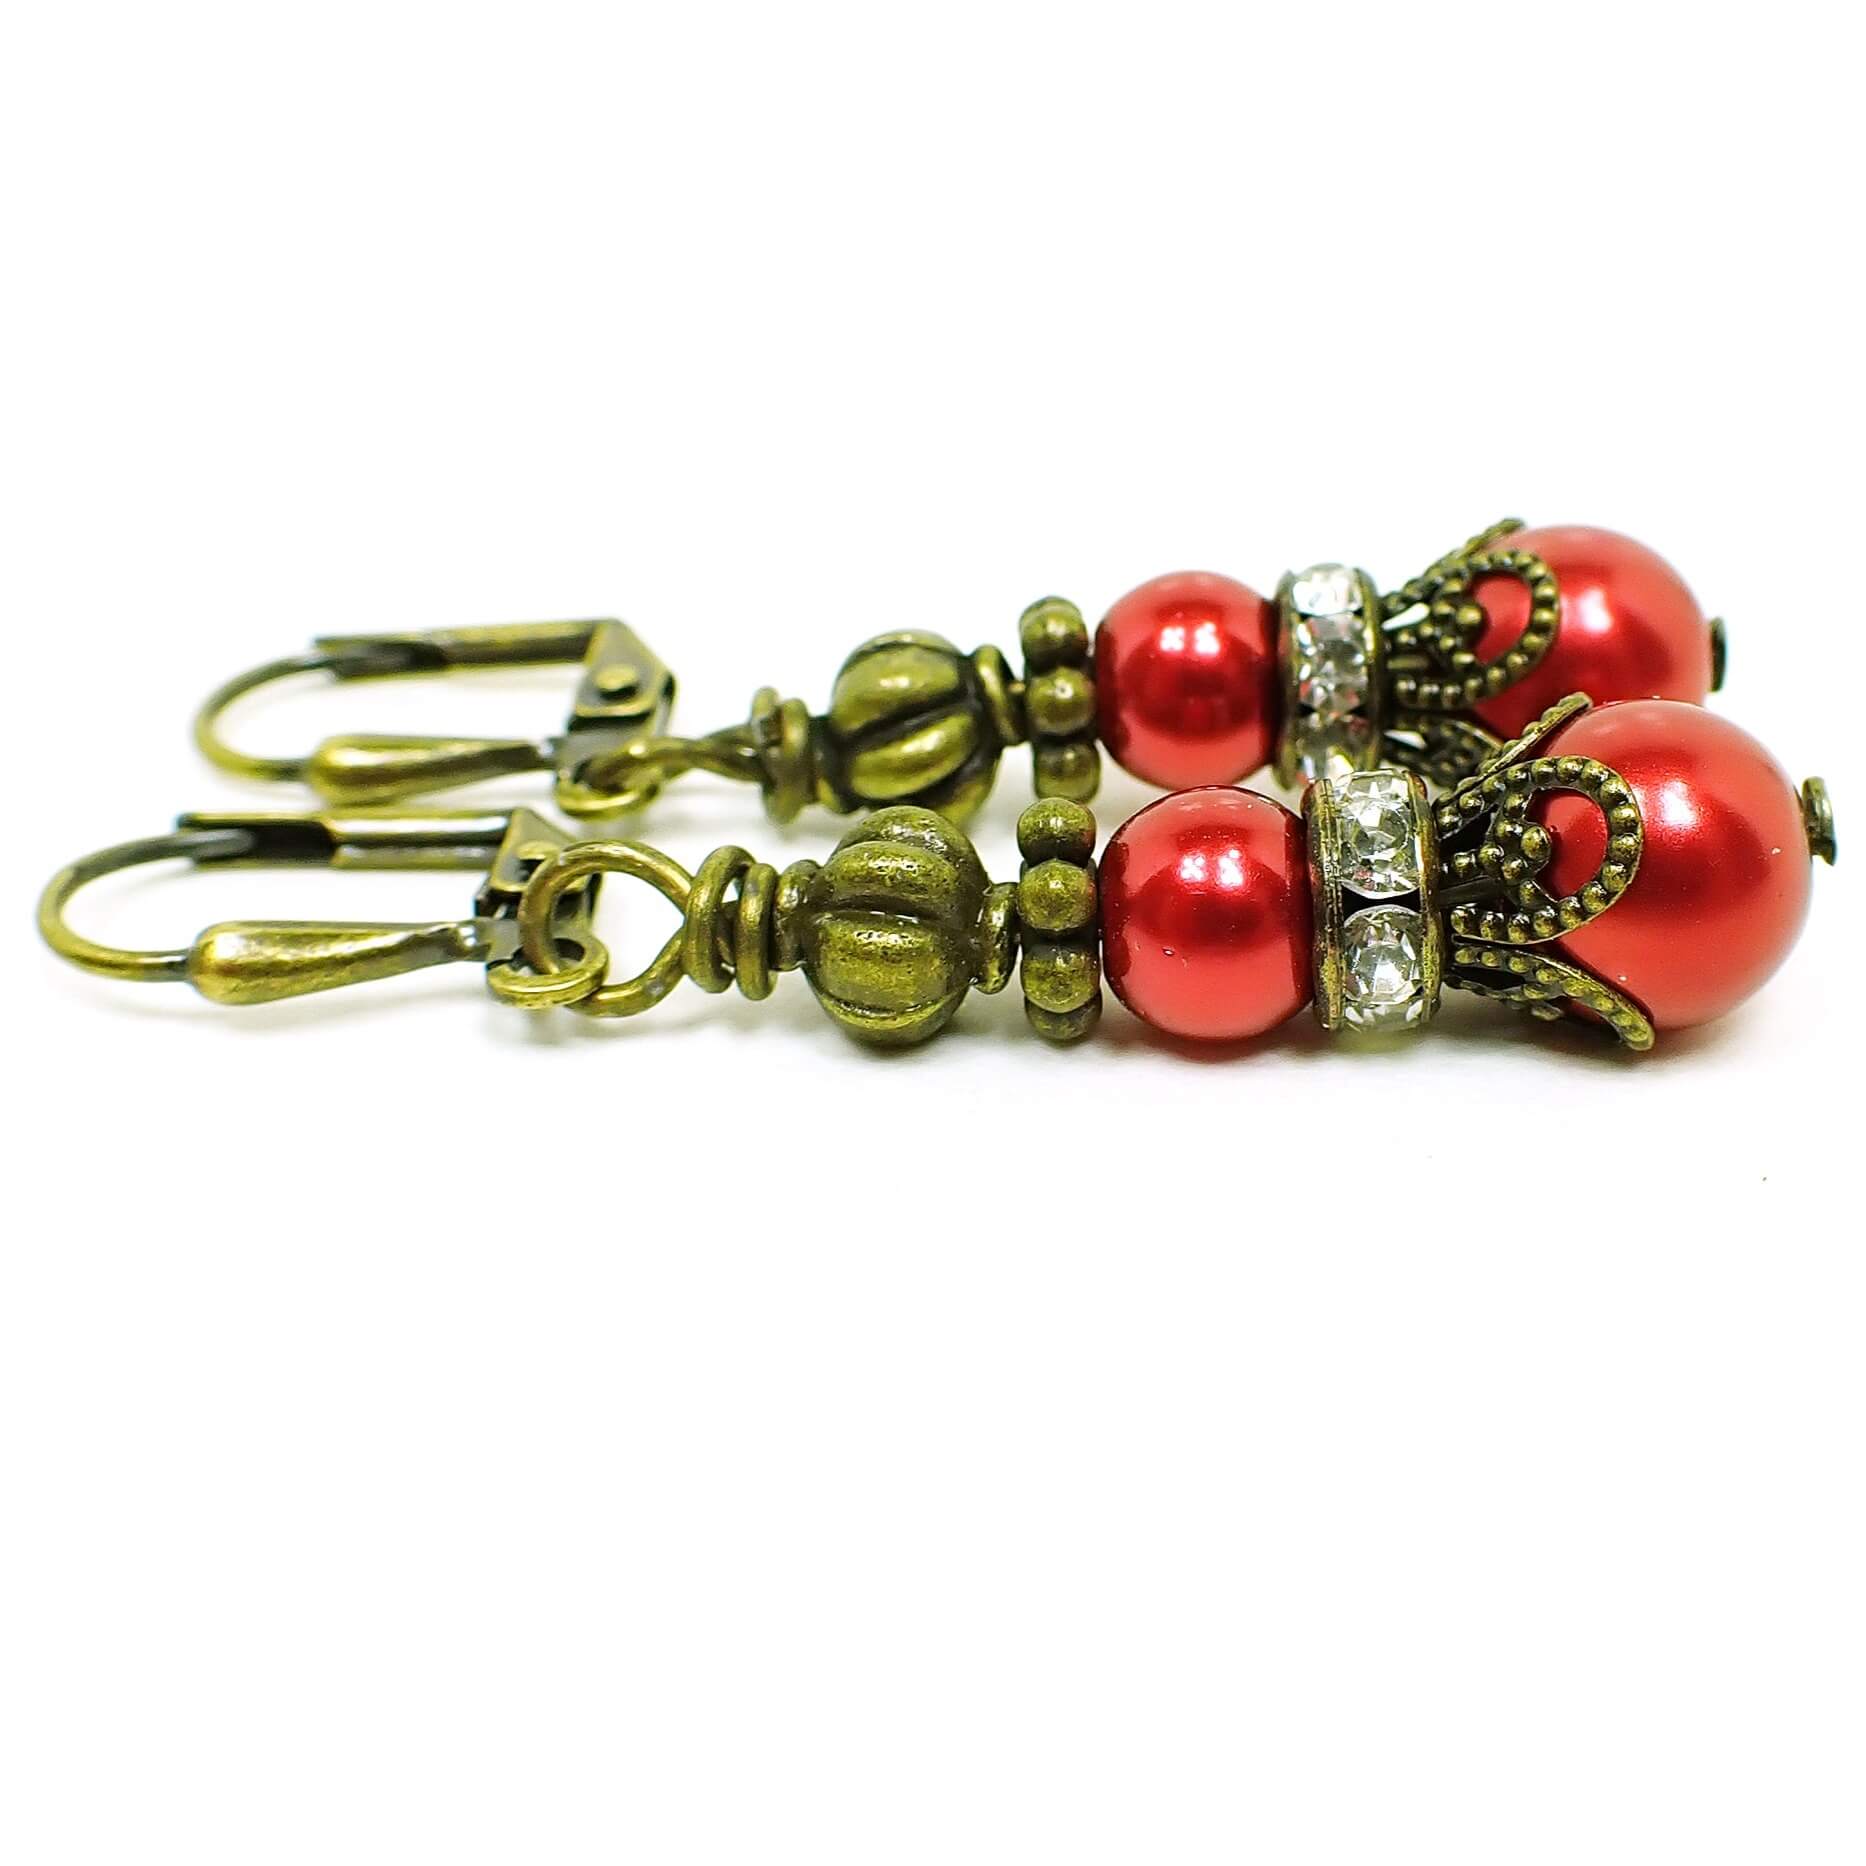 Side view of the handmade glass beaded earrings with rhinestones. The metal is antiqued brass in color. The earrings are beaded with a round metallic red coated glass bead, a rhinestone spacer bead, and then another larger round metallic red glass bead. 